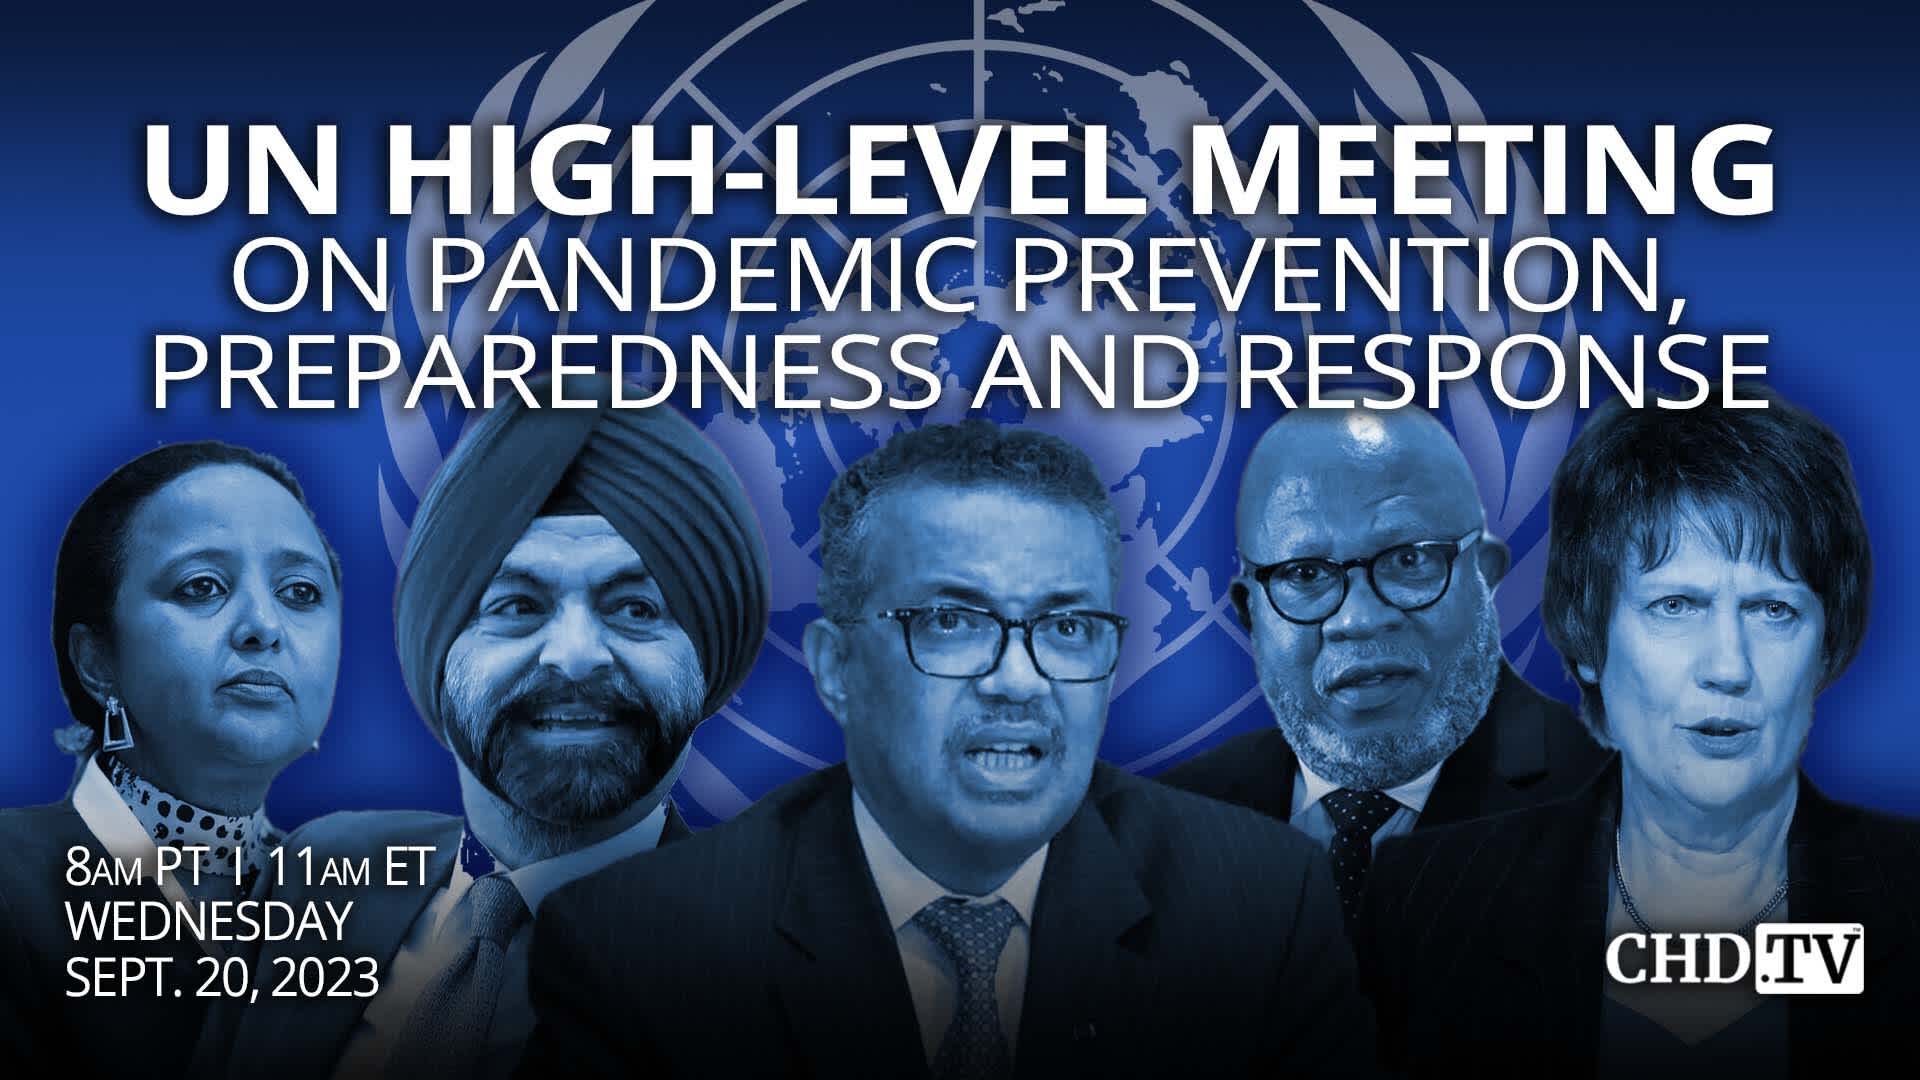 UN High-Level Meeting on Pandemic Prevention, Preparedness and Response